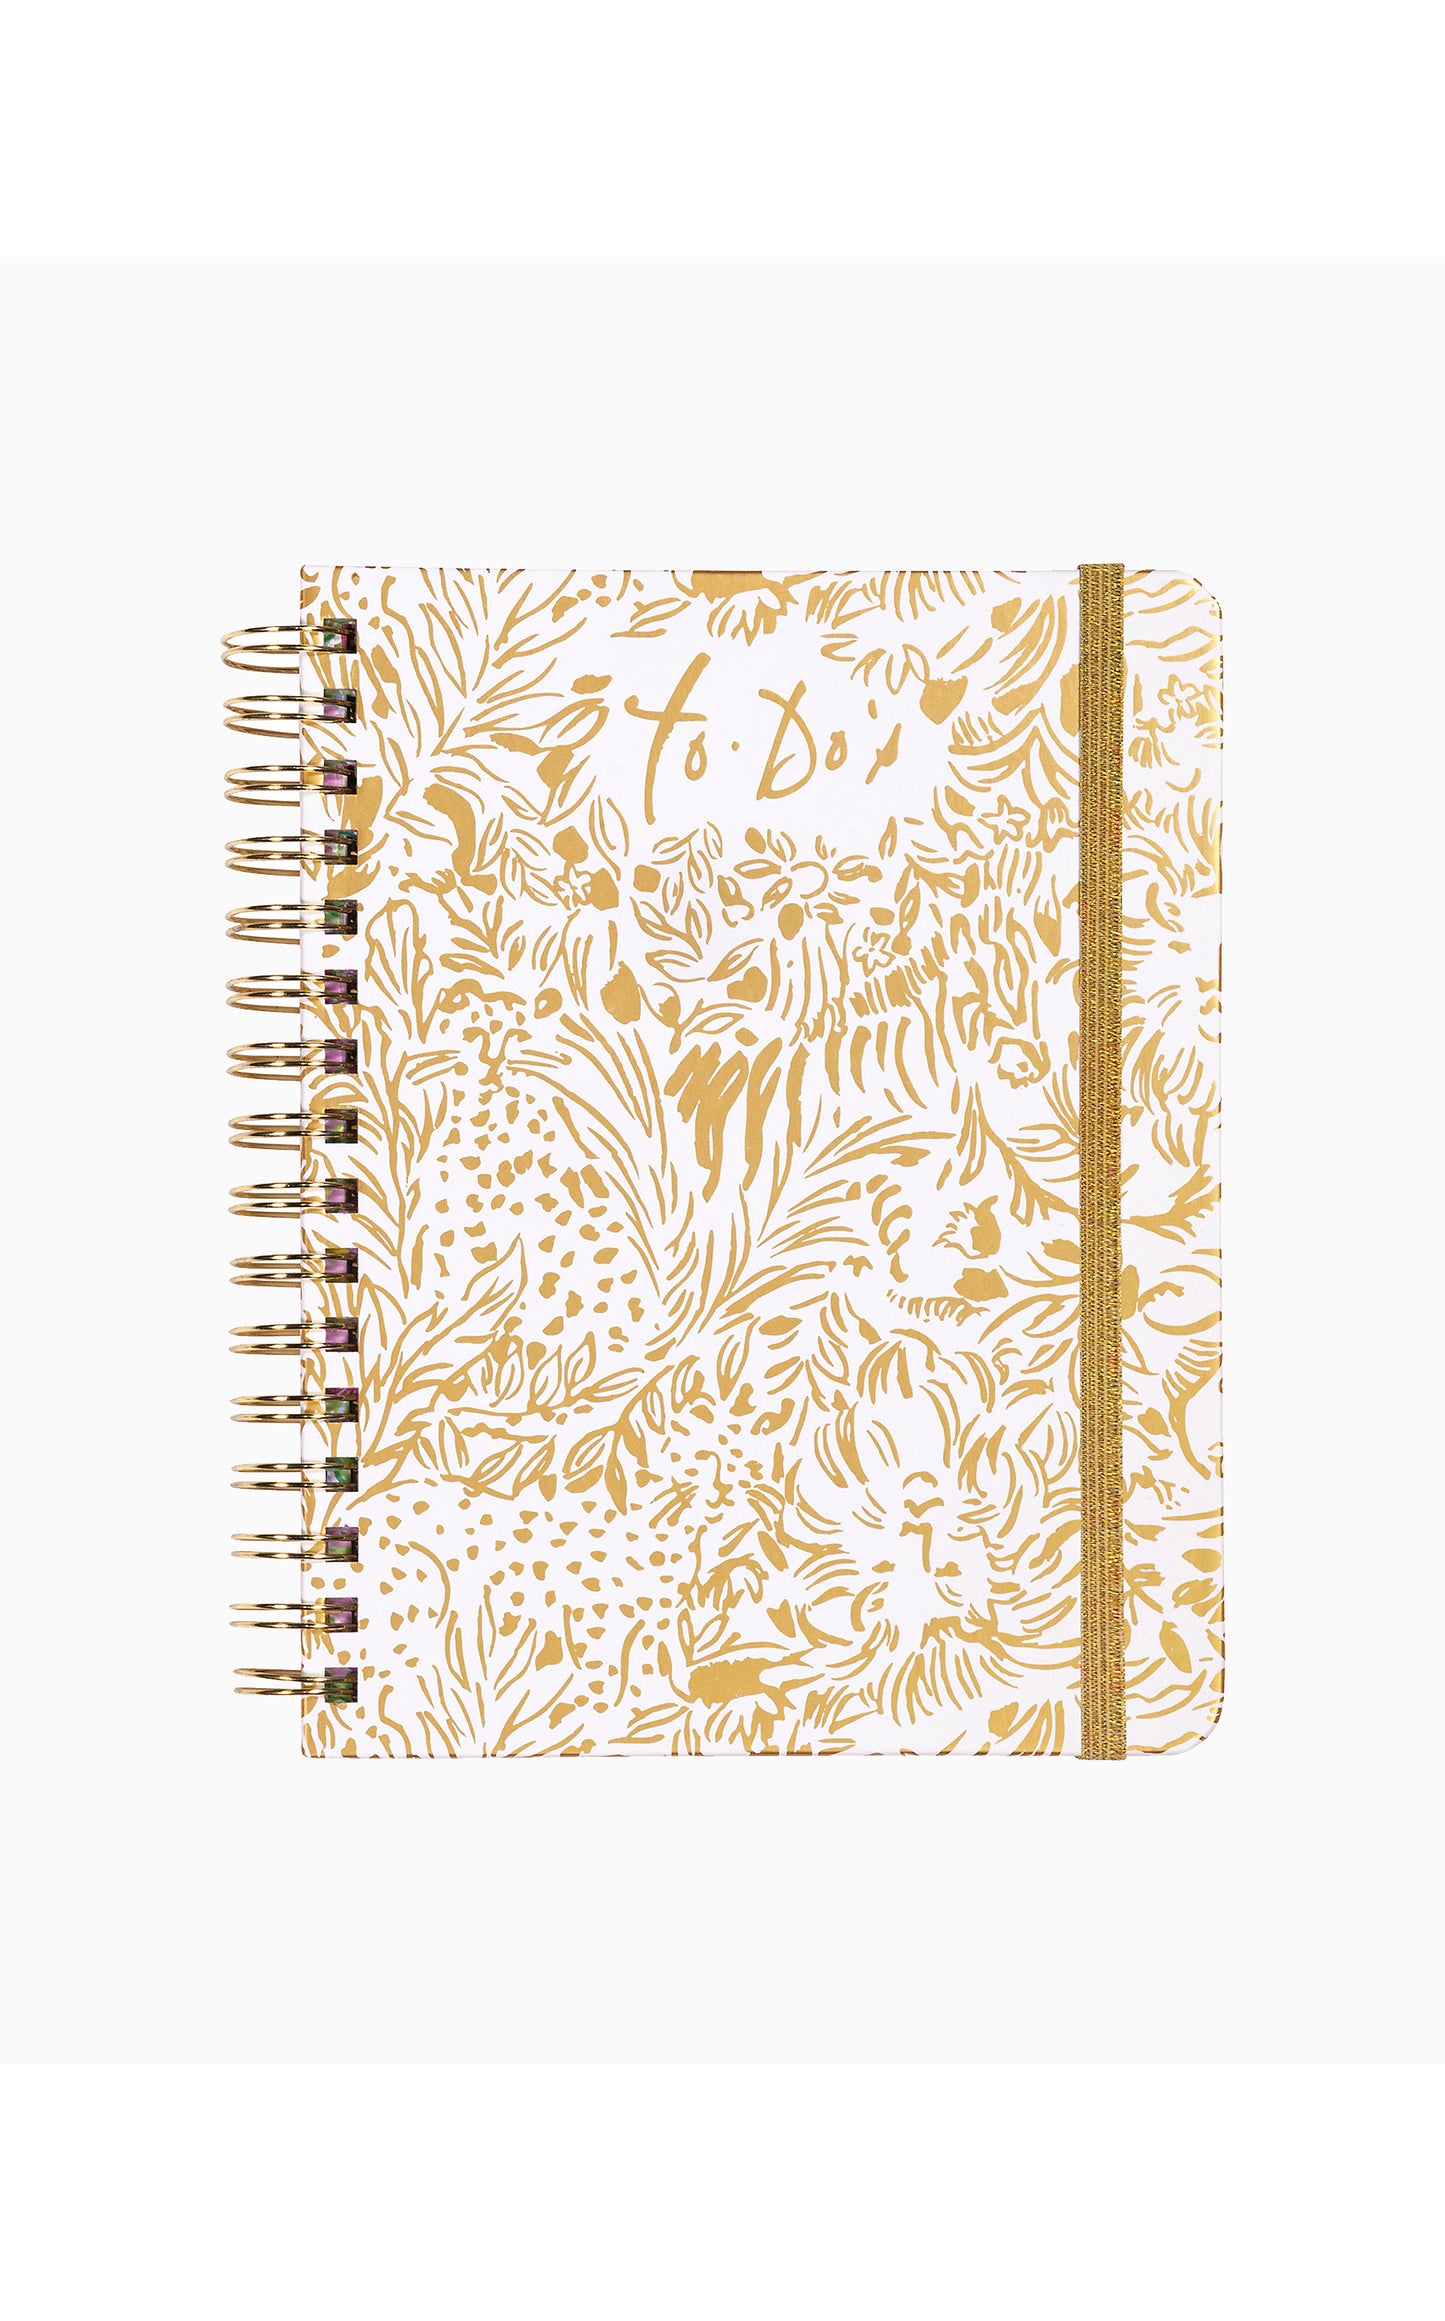 To Do Planner in Gold Metallic Dandy Lions